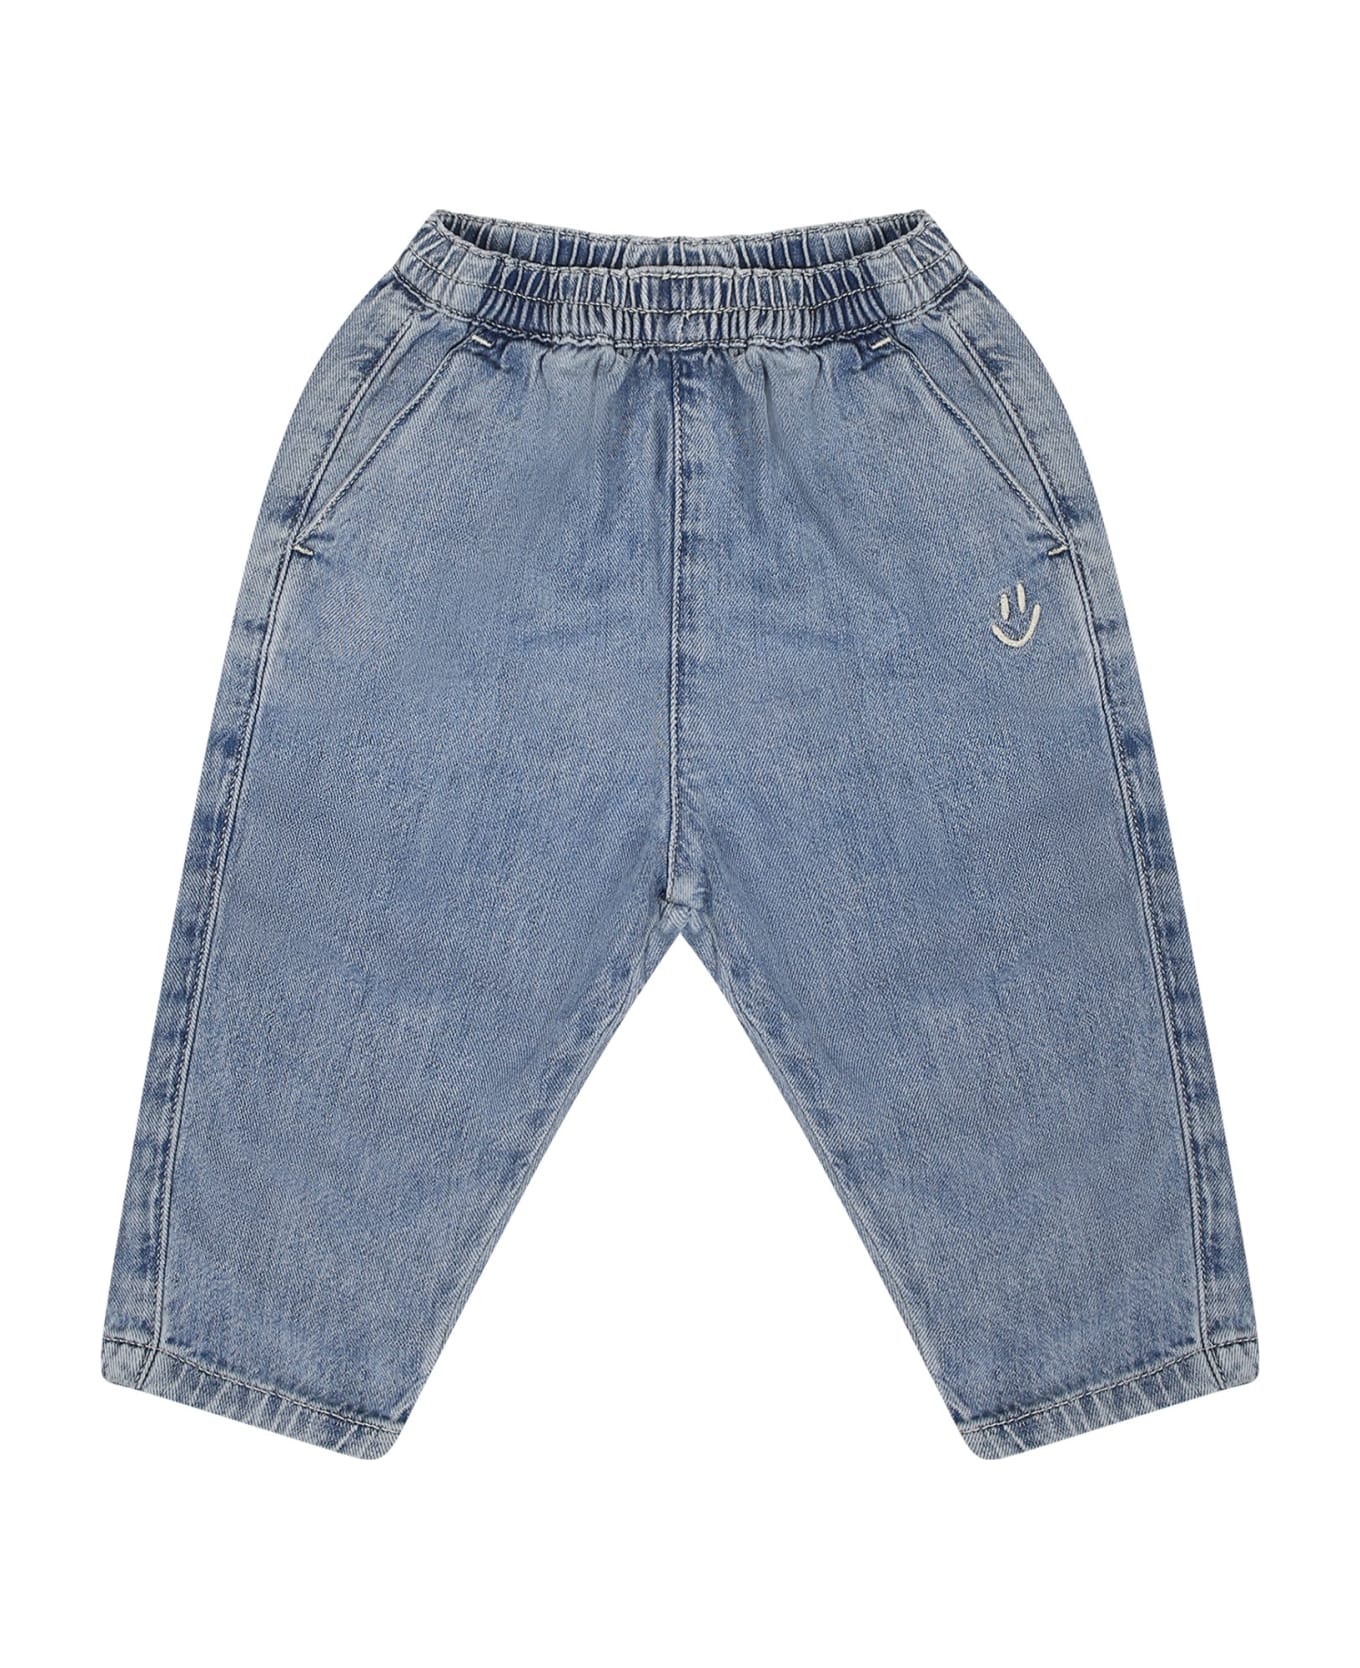 Molo Blue Jeans For Baby Boy With Smiley Face - Denim ボトムス